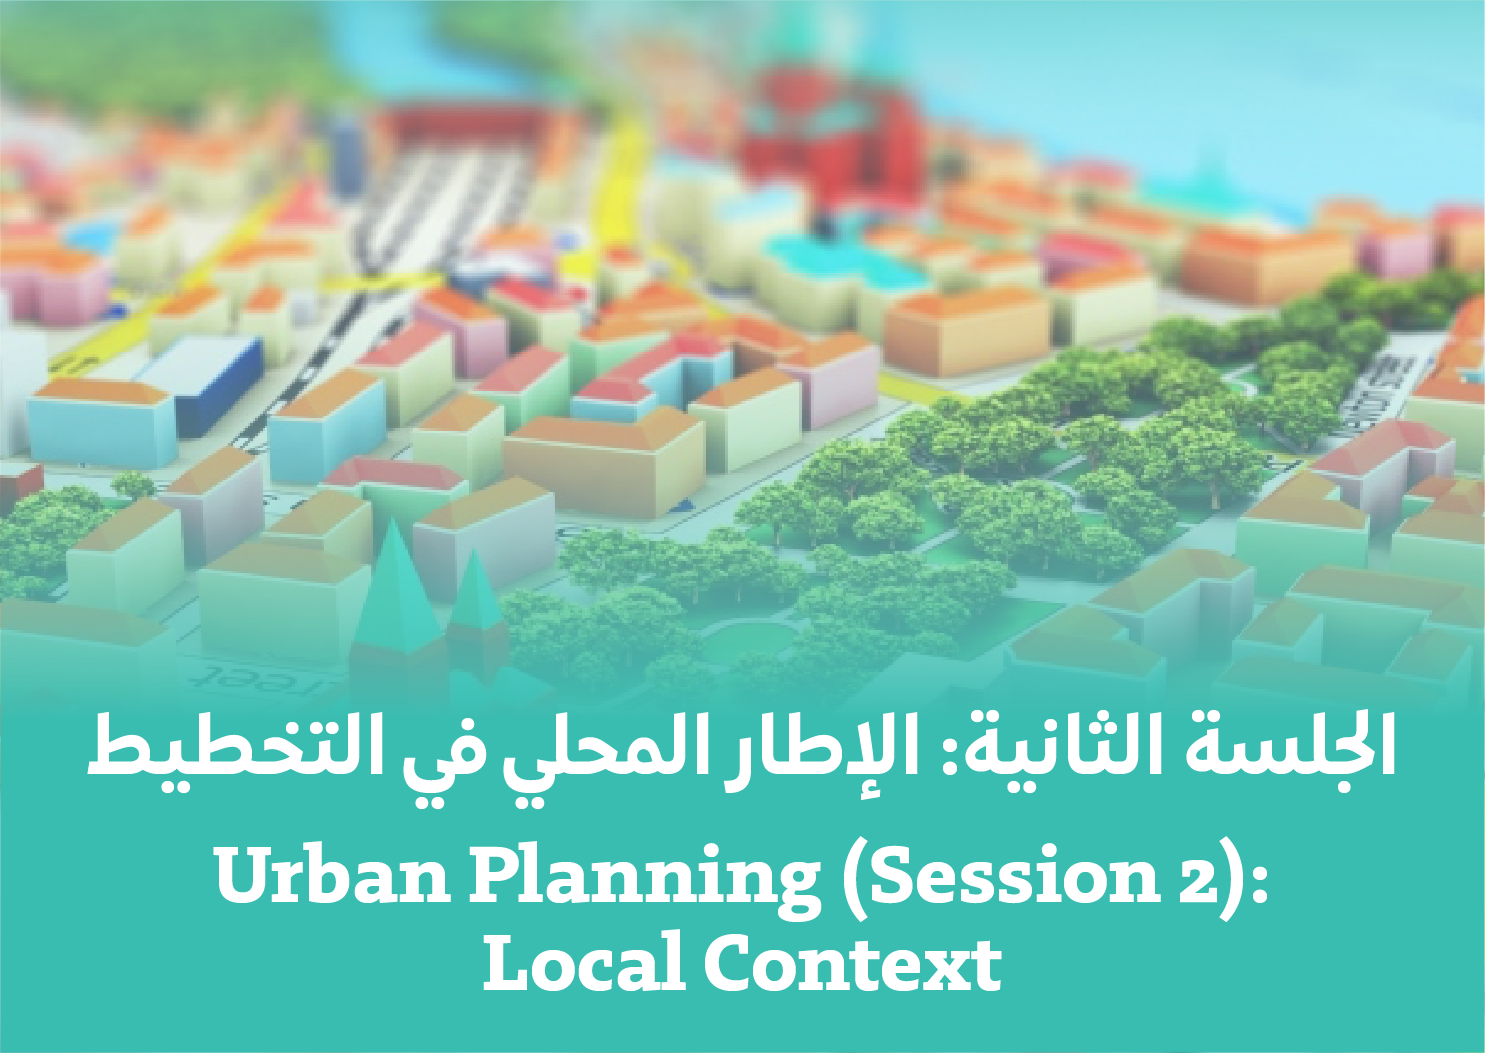 Session 2: Context of Local Planning